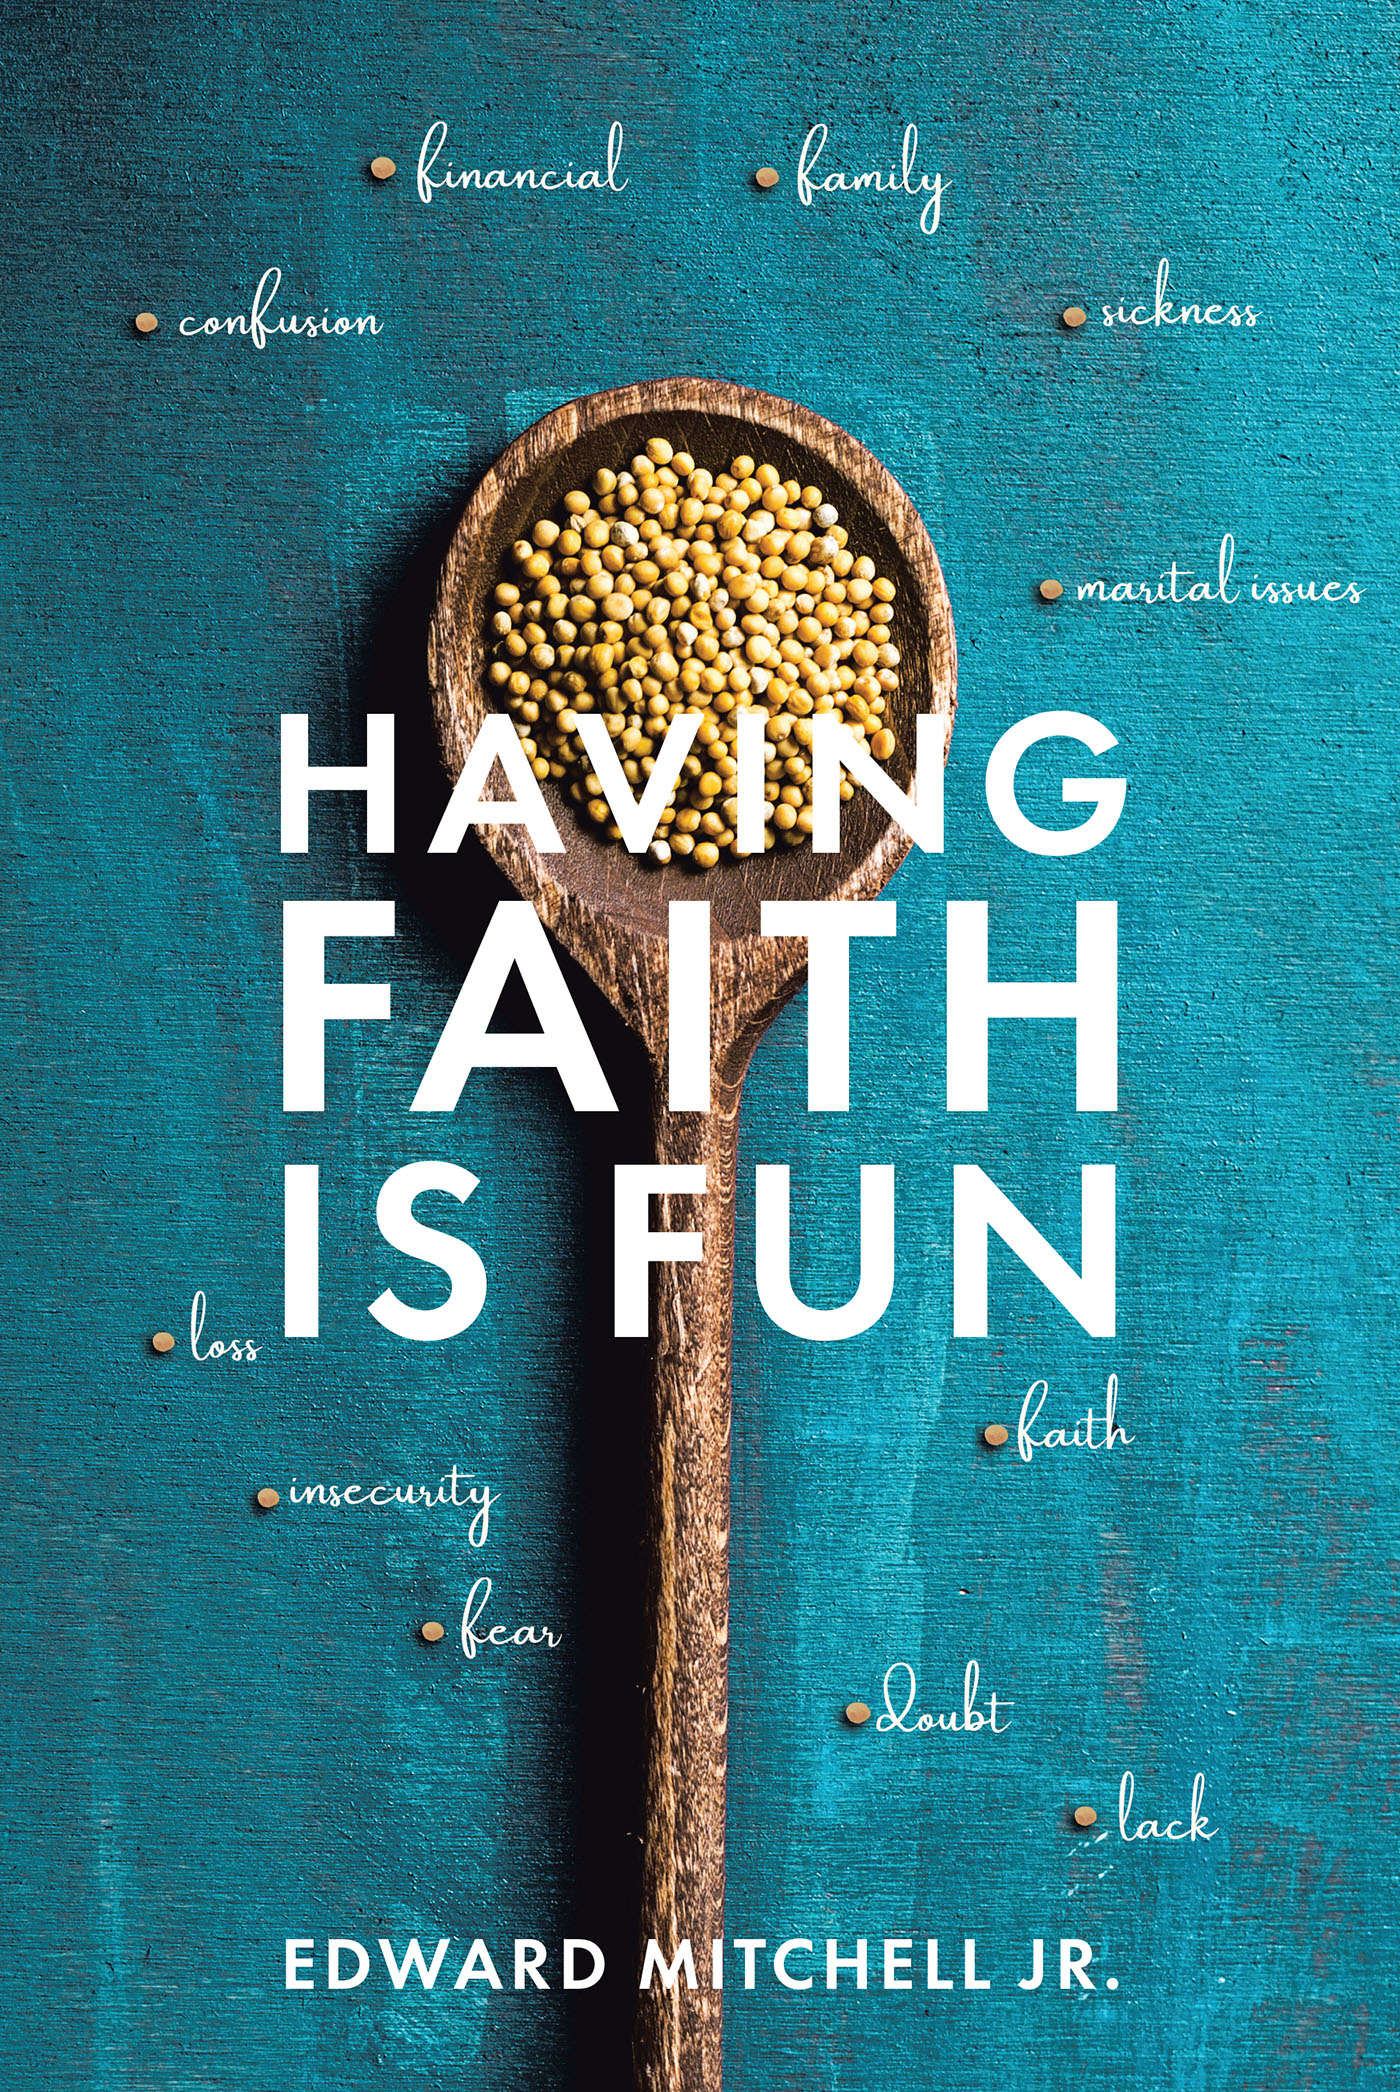 Edward Mitchell Jr.’s Newly Released “Having Faith Is Fun” is an Encouraging Message of the Power and Resiliency One Can Find in Unwavering Faith